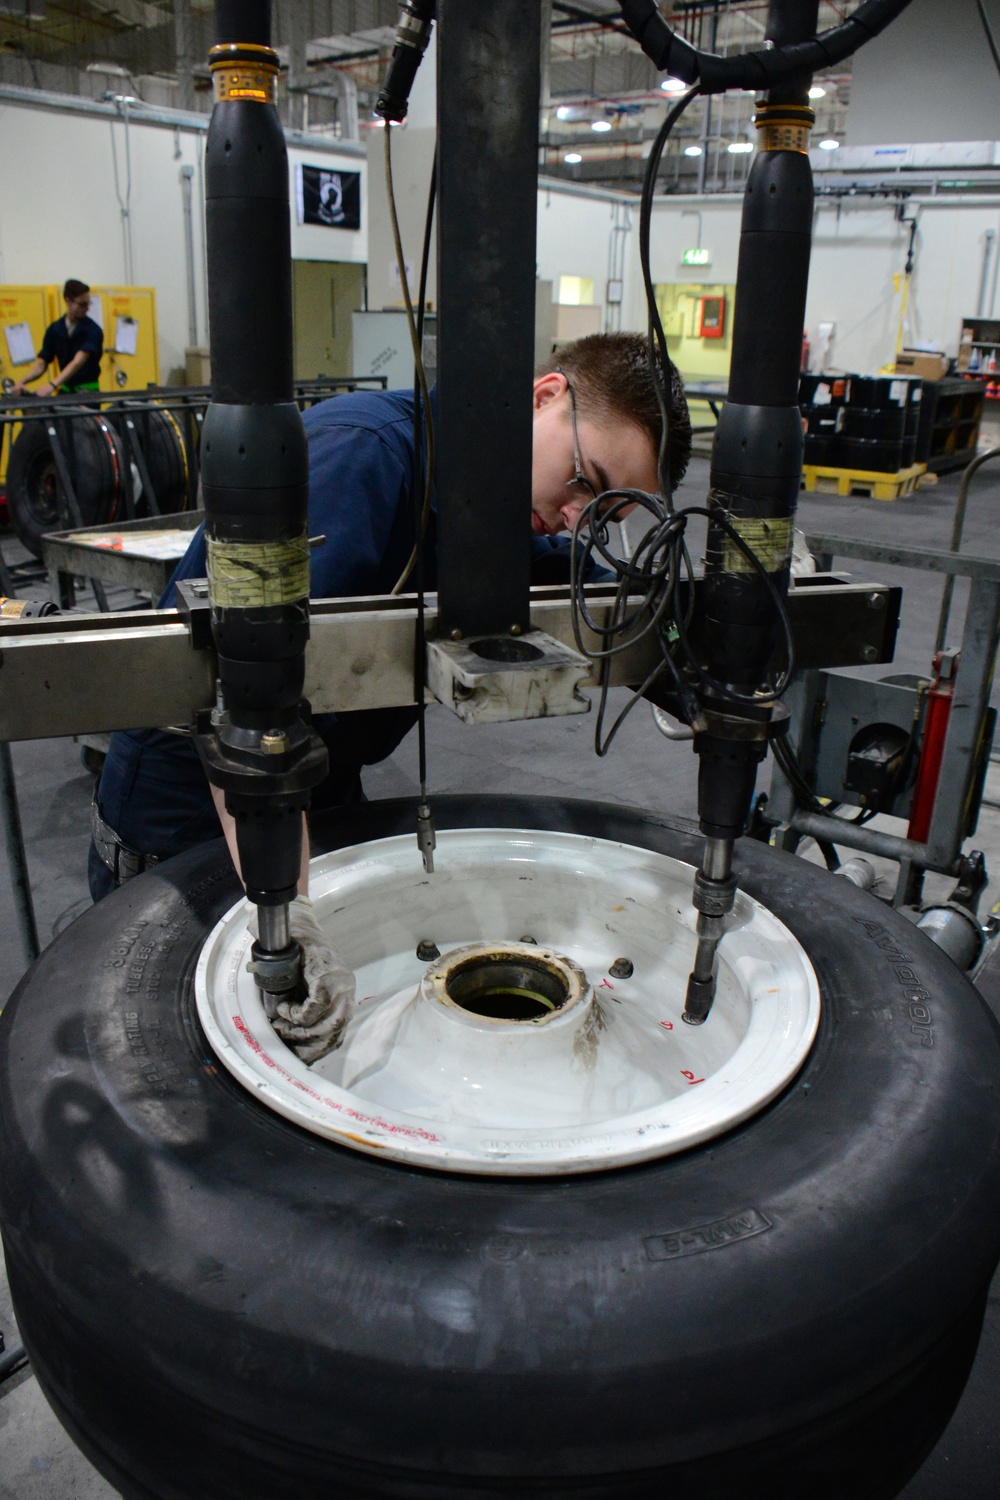 379th EMXS operates most productive Air Force wheel, tire repair facility